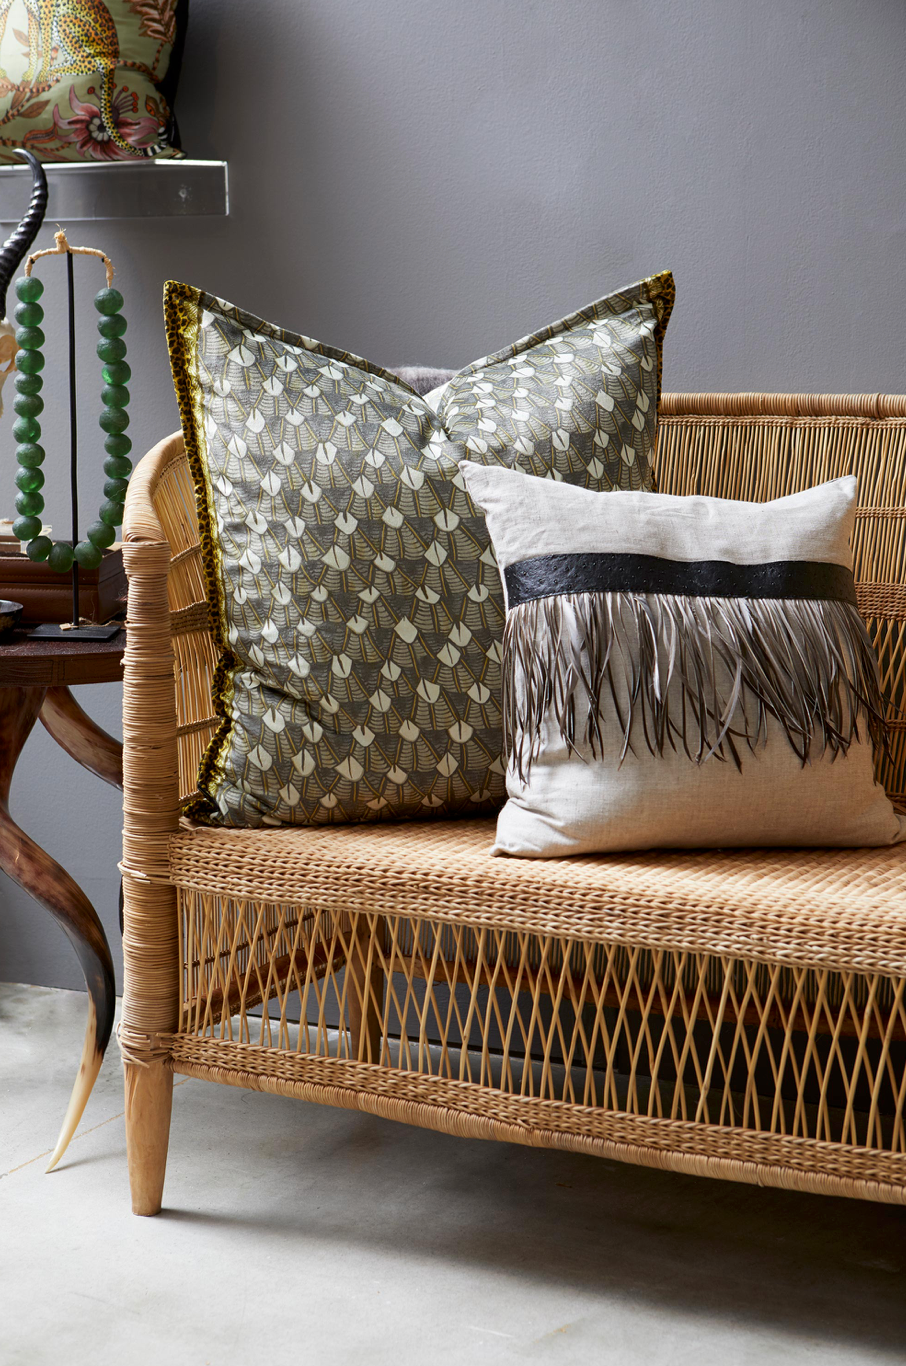 Ardmore Feather velvet pillows from South Africa